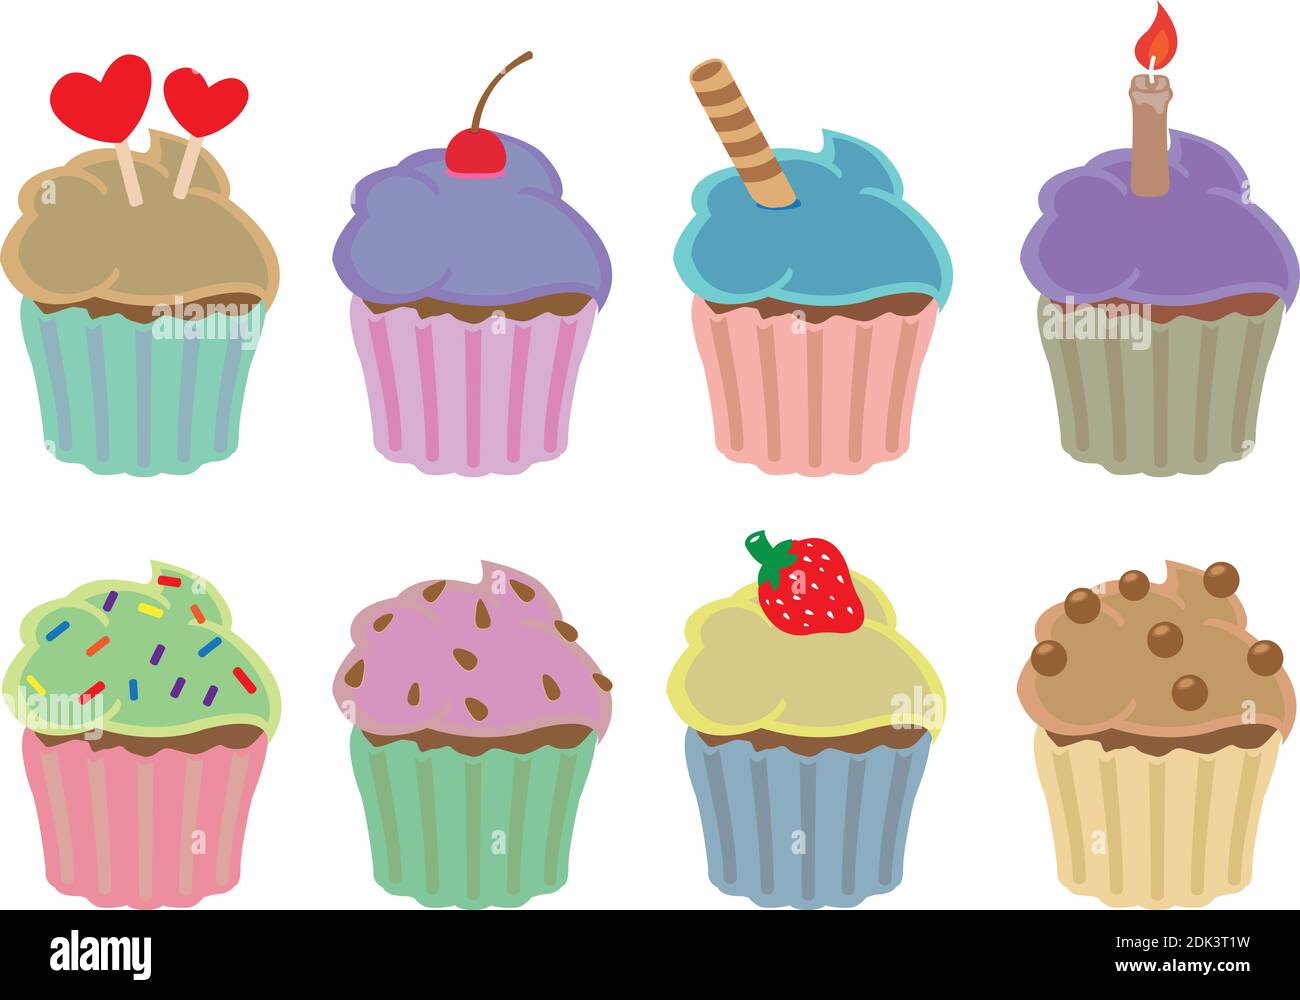 Vector illustration set of colorful cupcakes in different flavors and toppings isolated on white background. Stock Vector